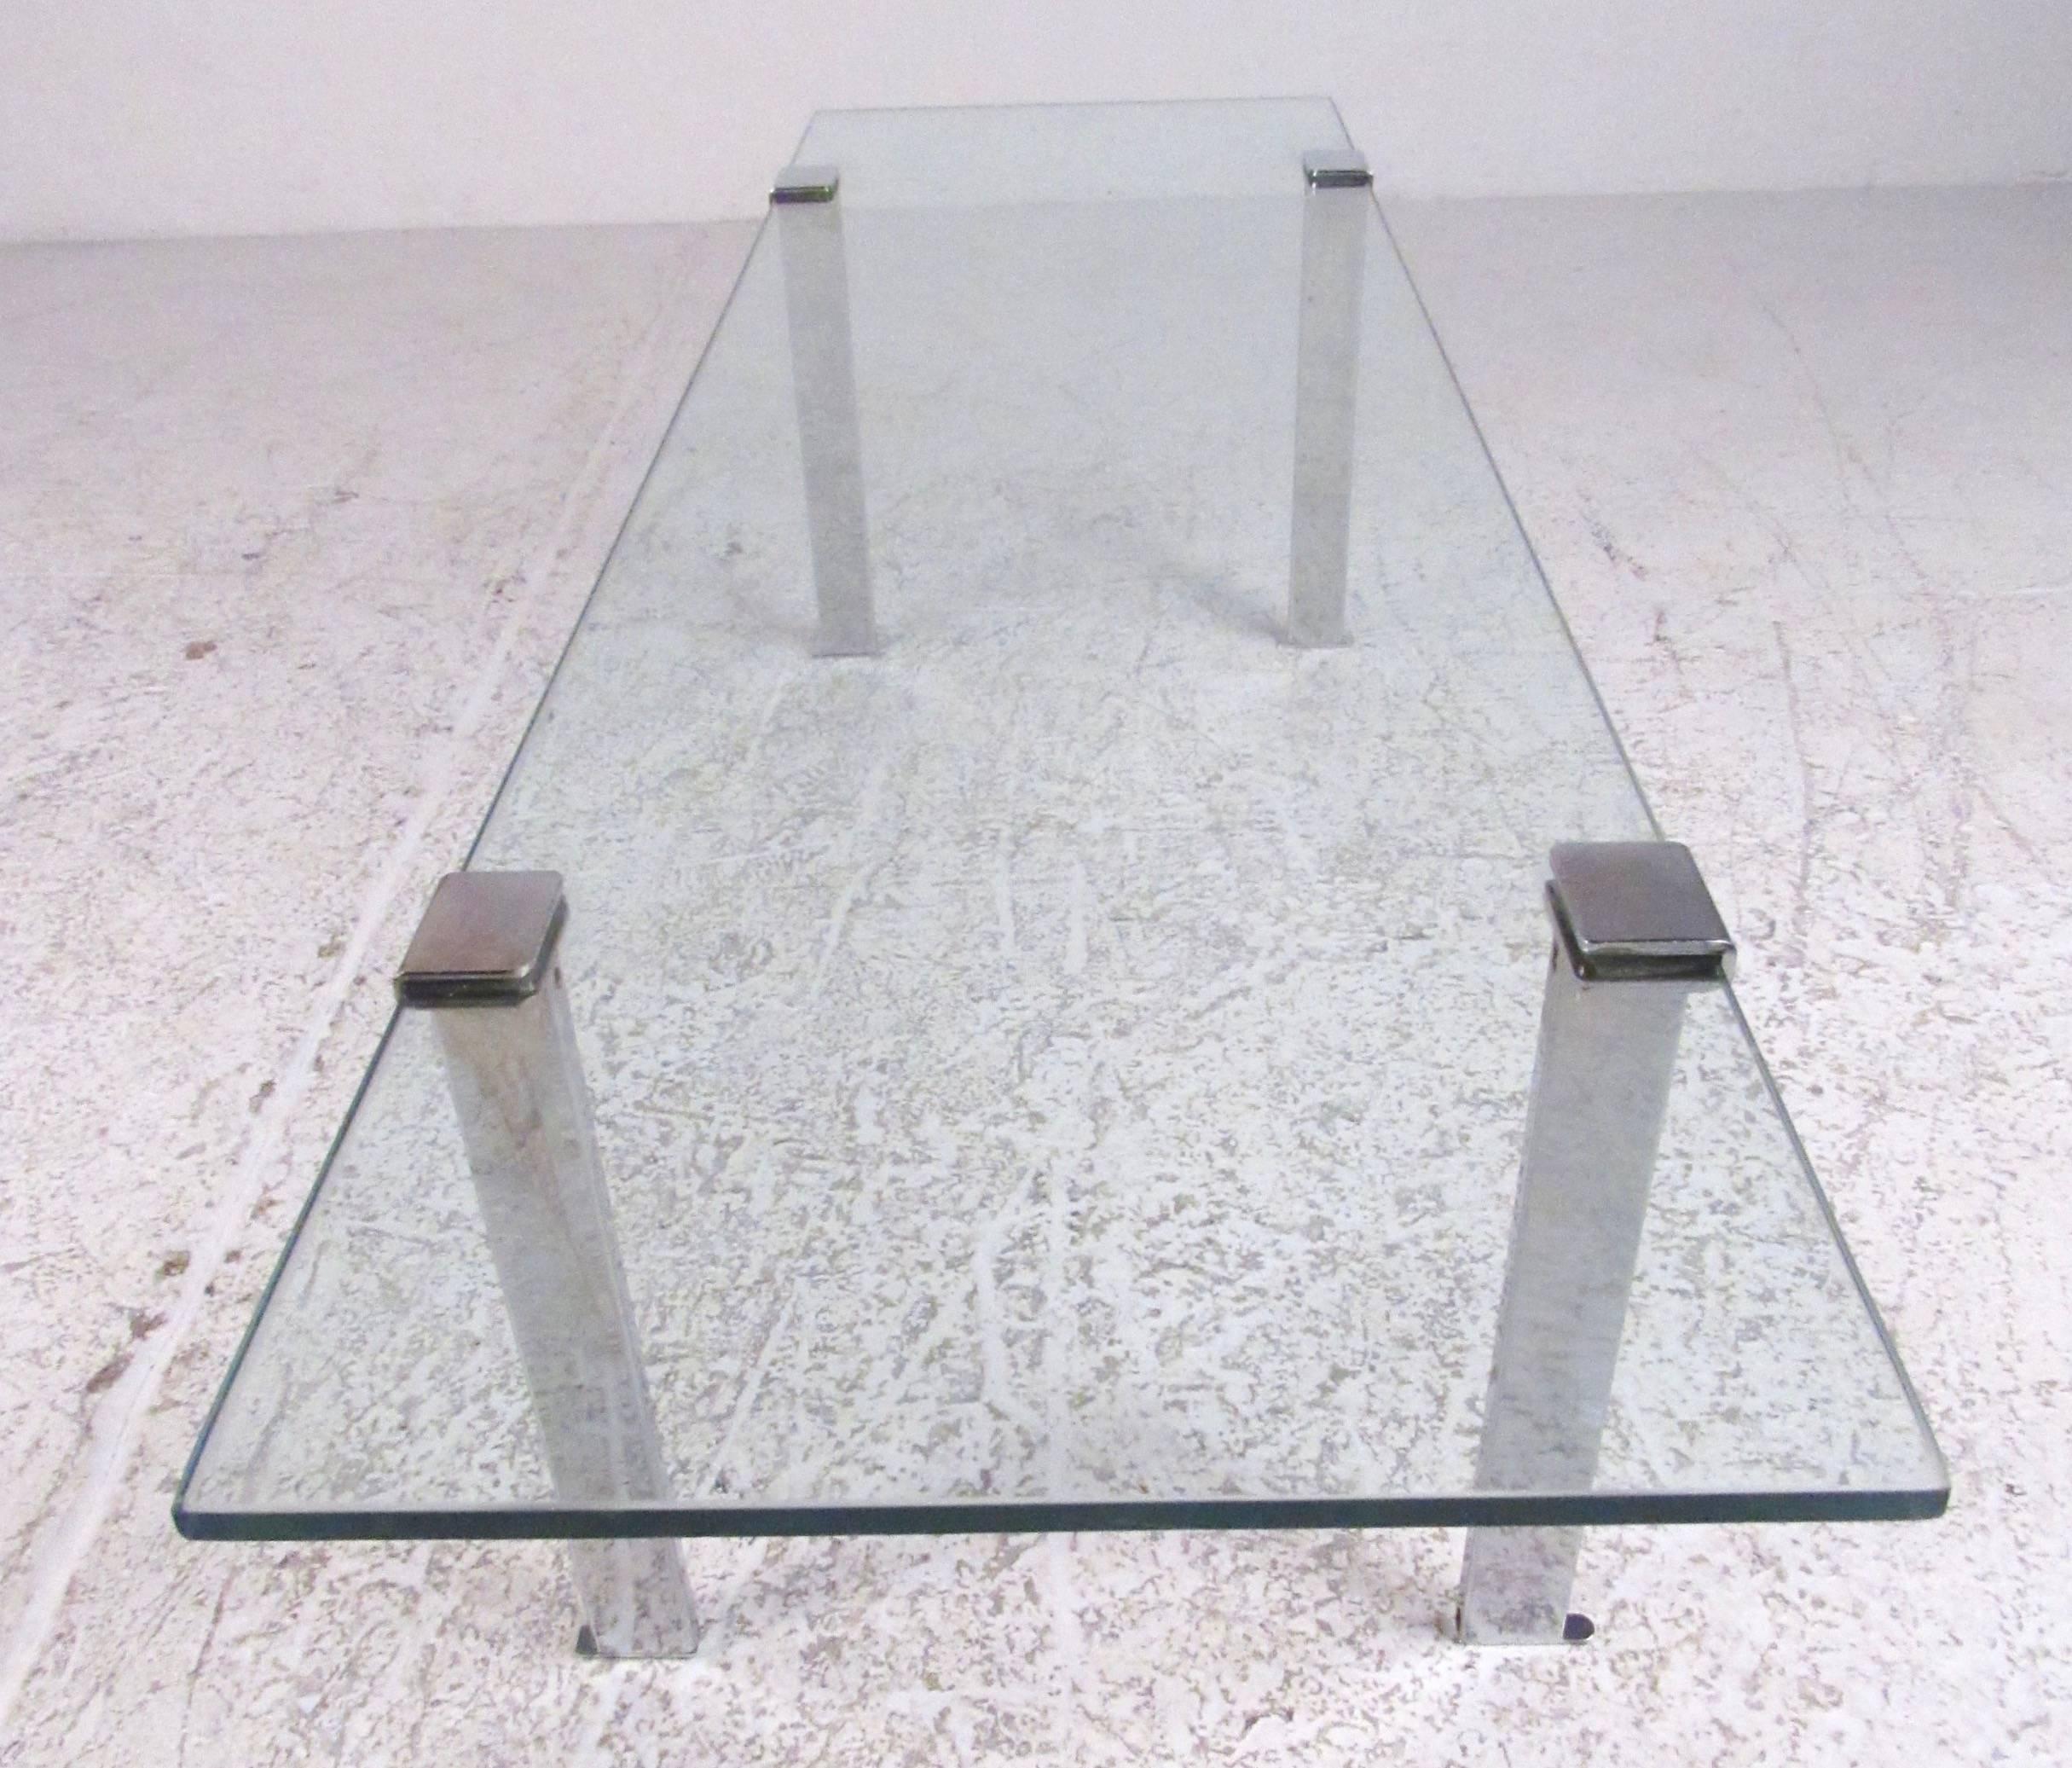 This simple modern coffee table features vintage chrome finish and rectangular glass top. Perfect size and shape for home or business seating area. Please confirm item location (NY or NJ).